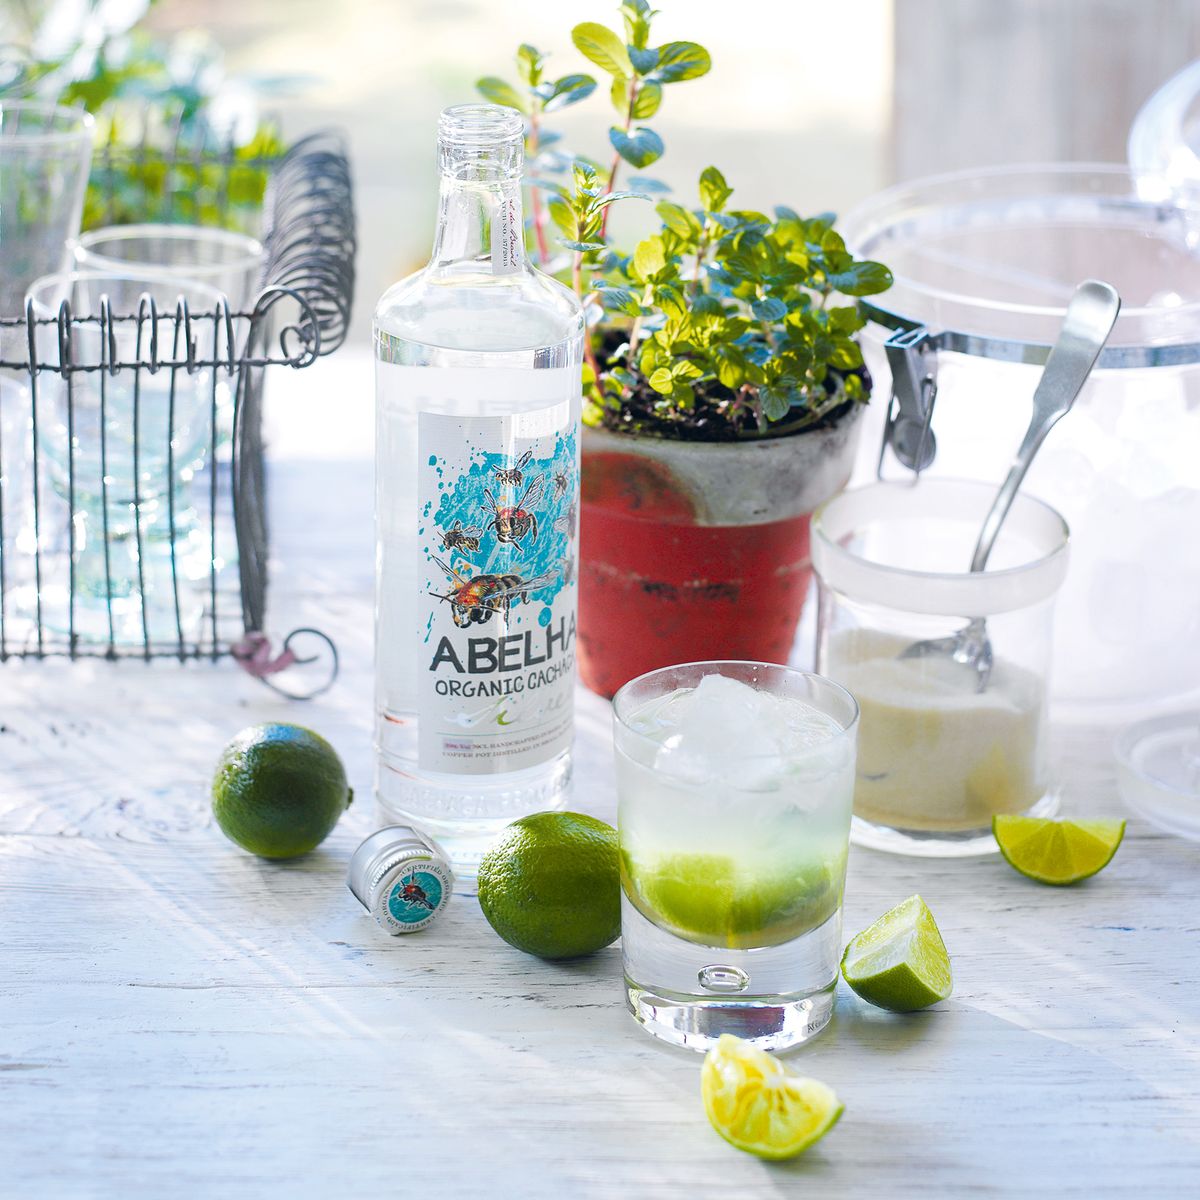 Get the party started with our favourite easy caipirinha cocktail recipe